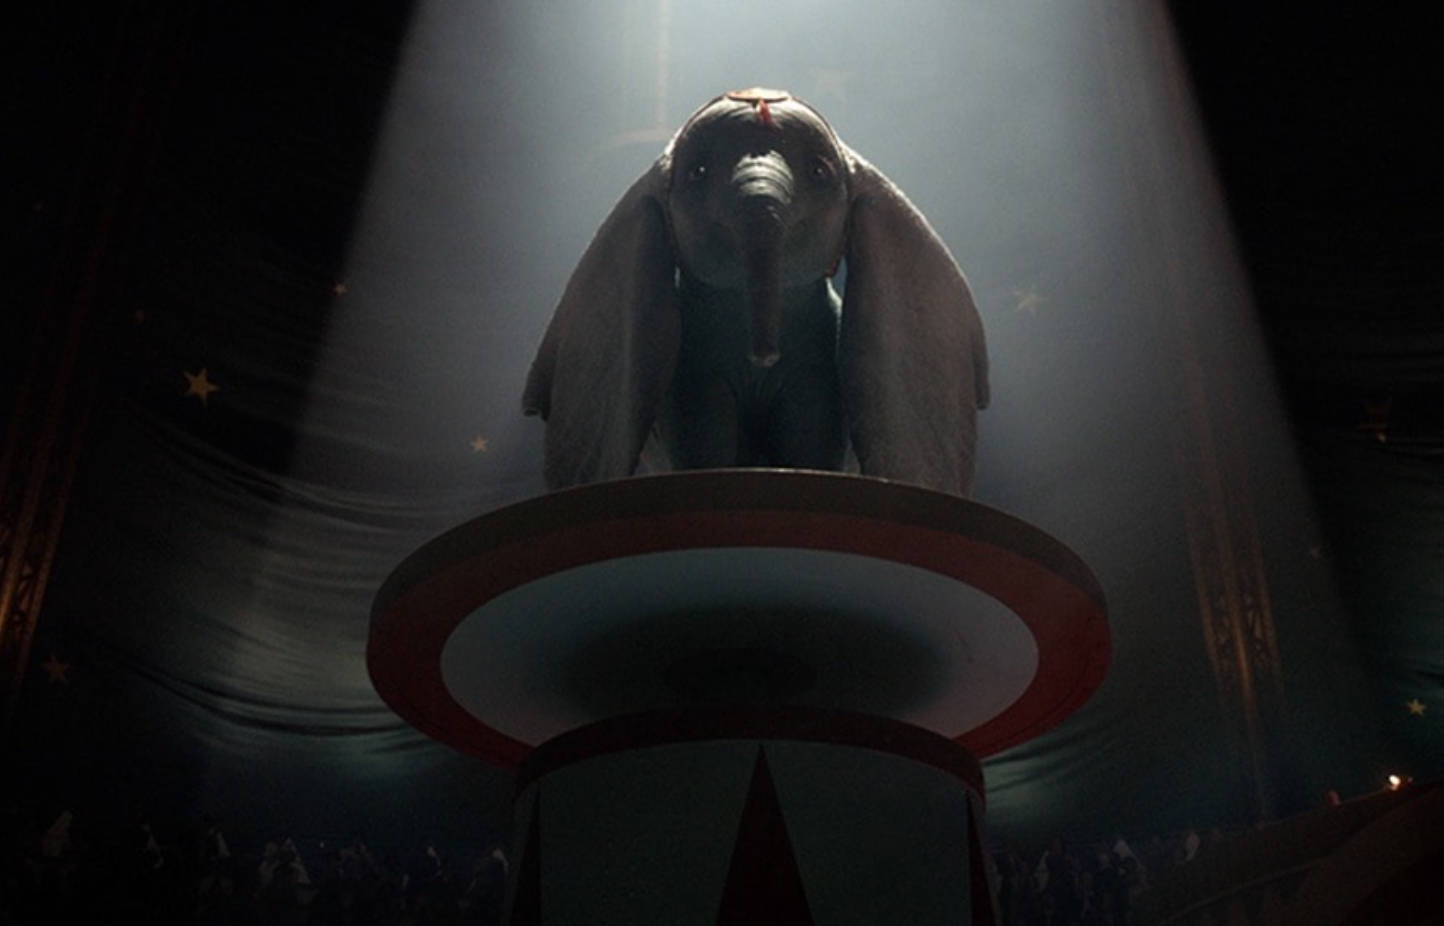 Dumbo and Other Upcoming Disney Live-Action Films